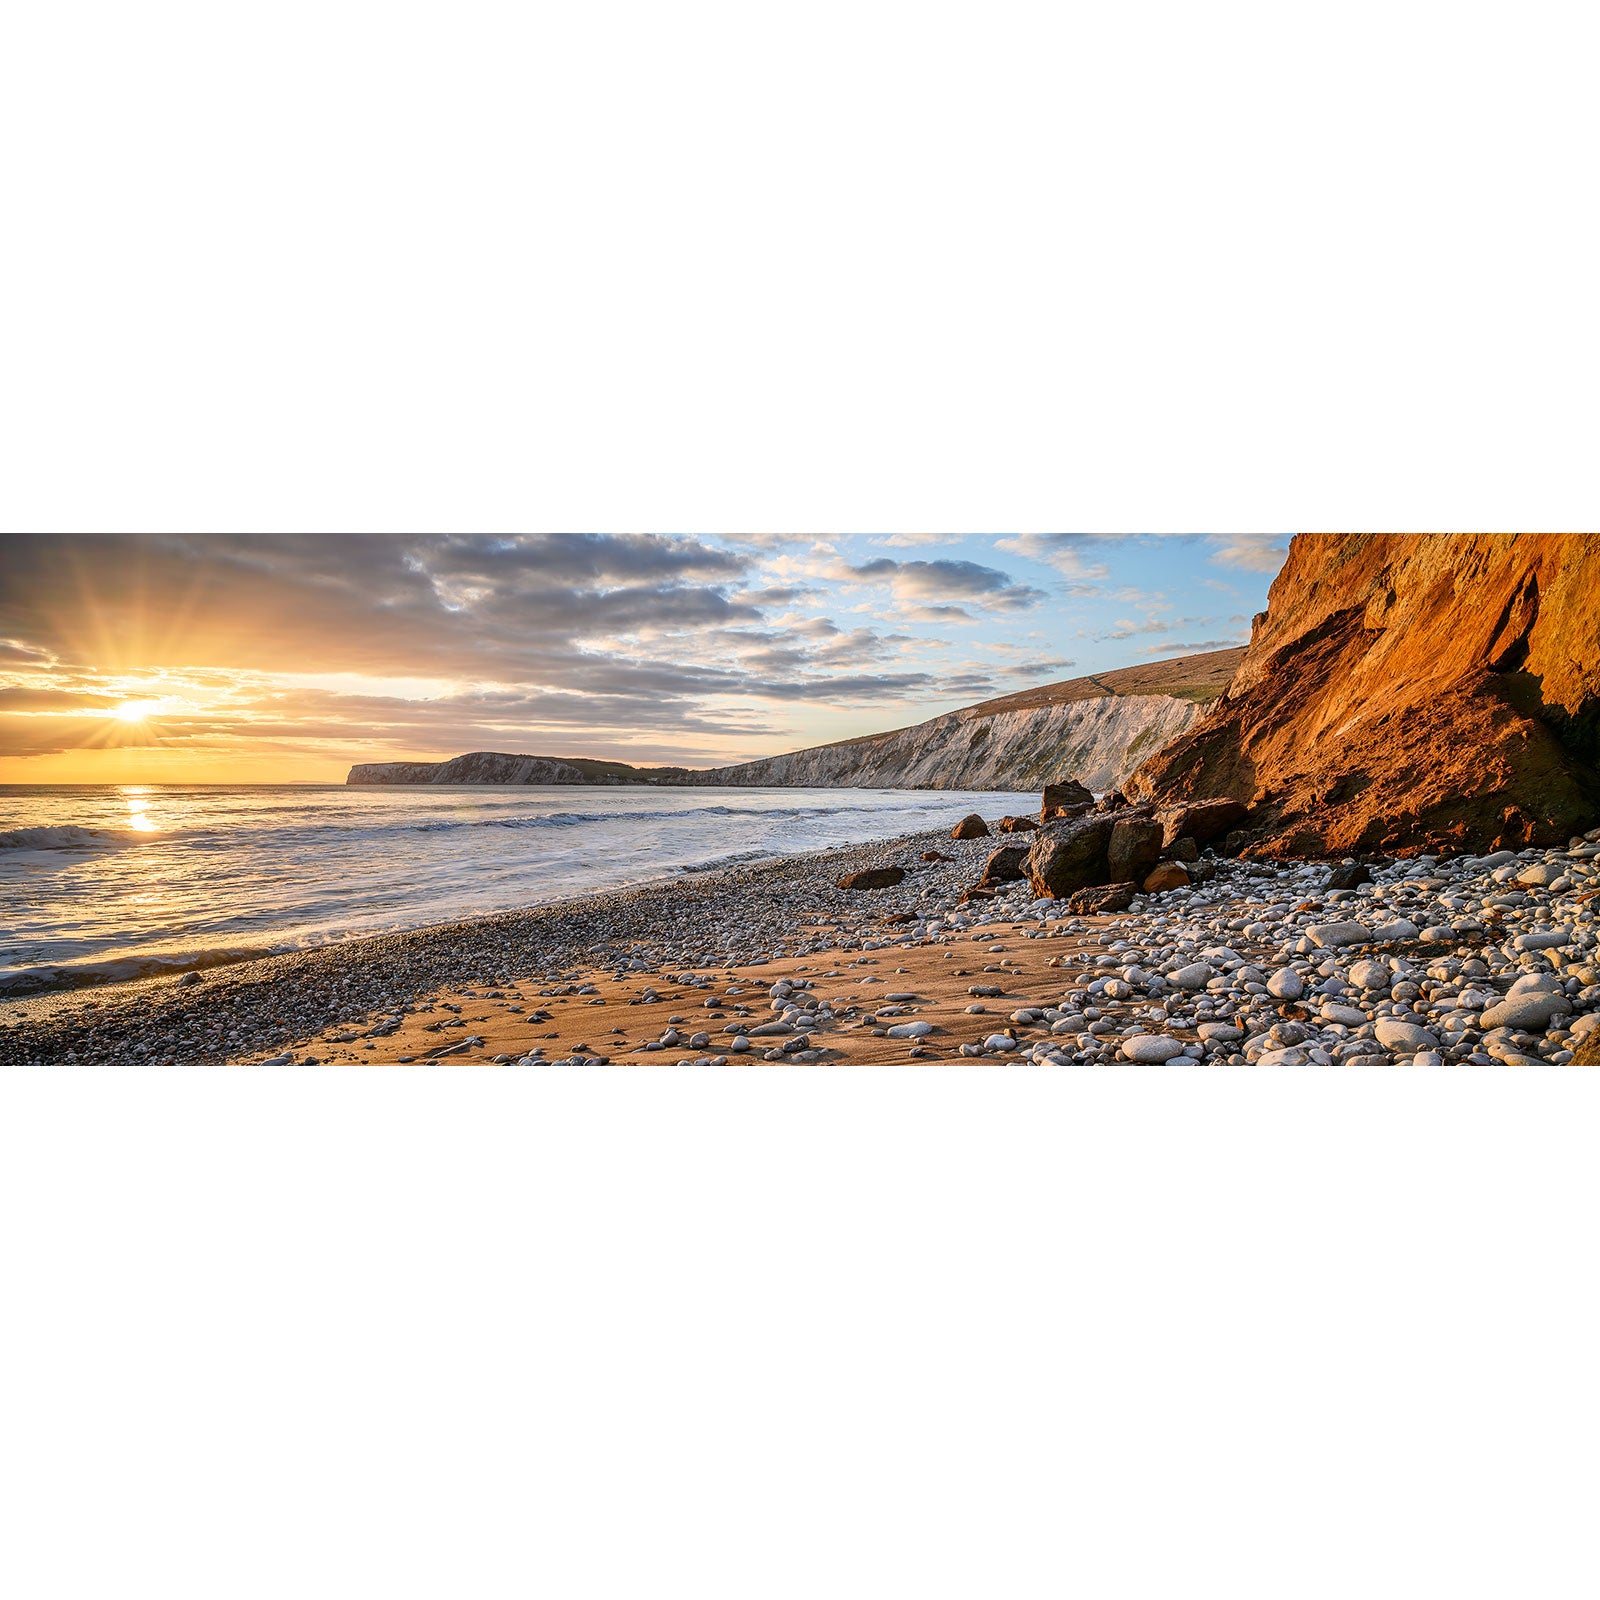 Sunset at Compton Bay, a pebble beach on the Isle of Wight with cliffs on the coastline, captured by Available Light Photography.